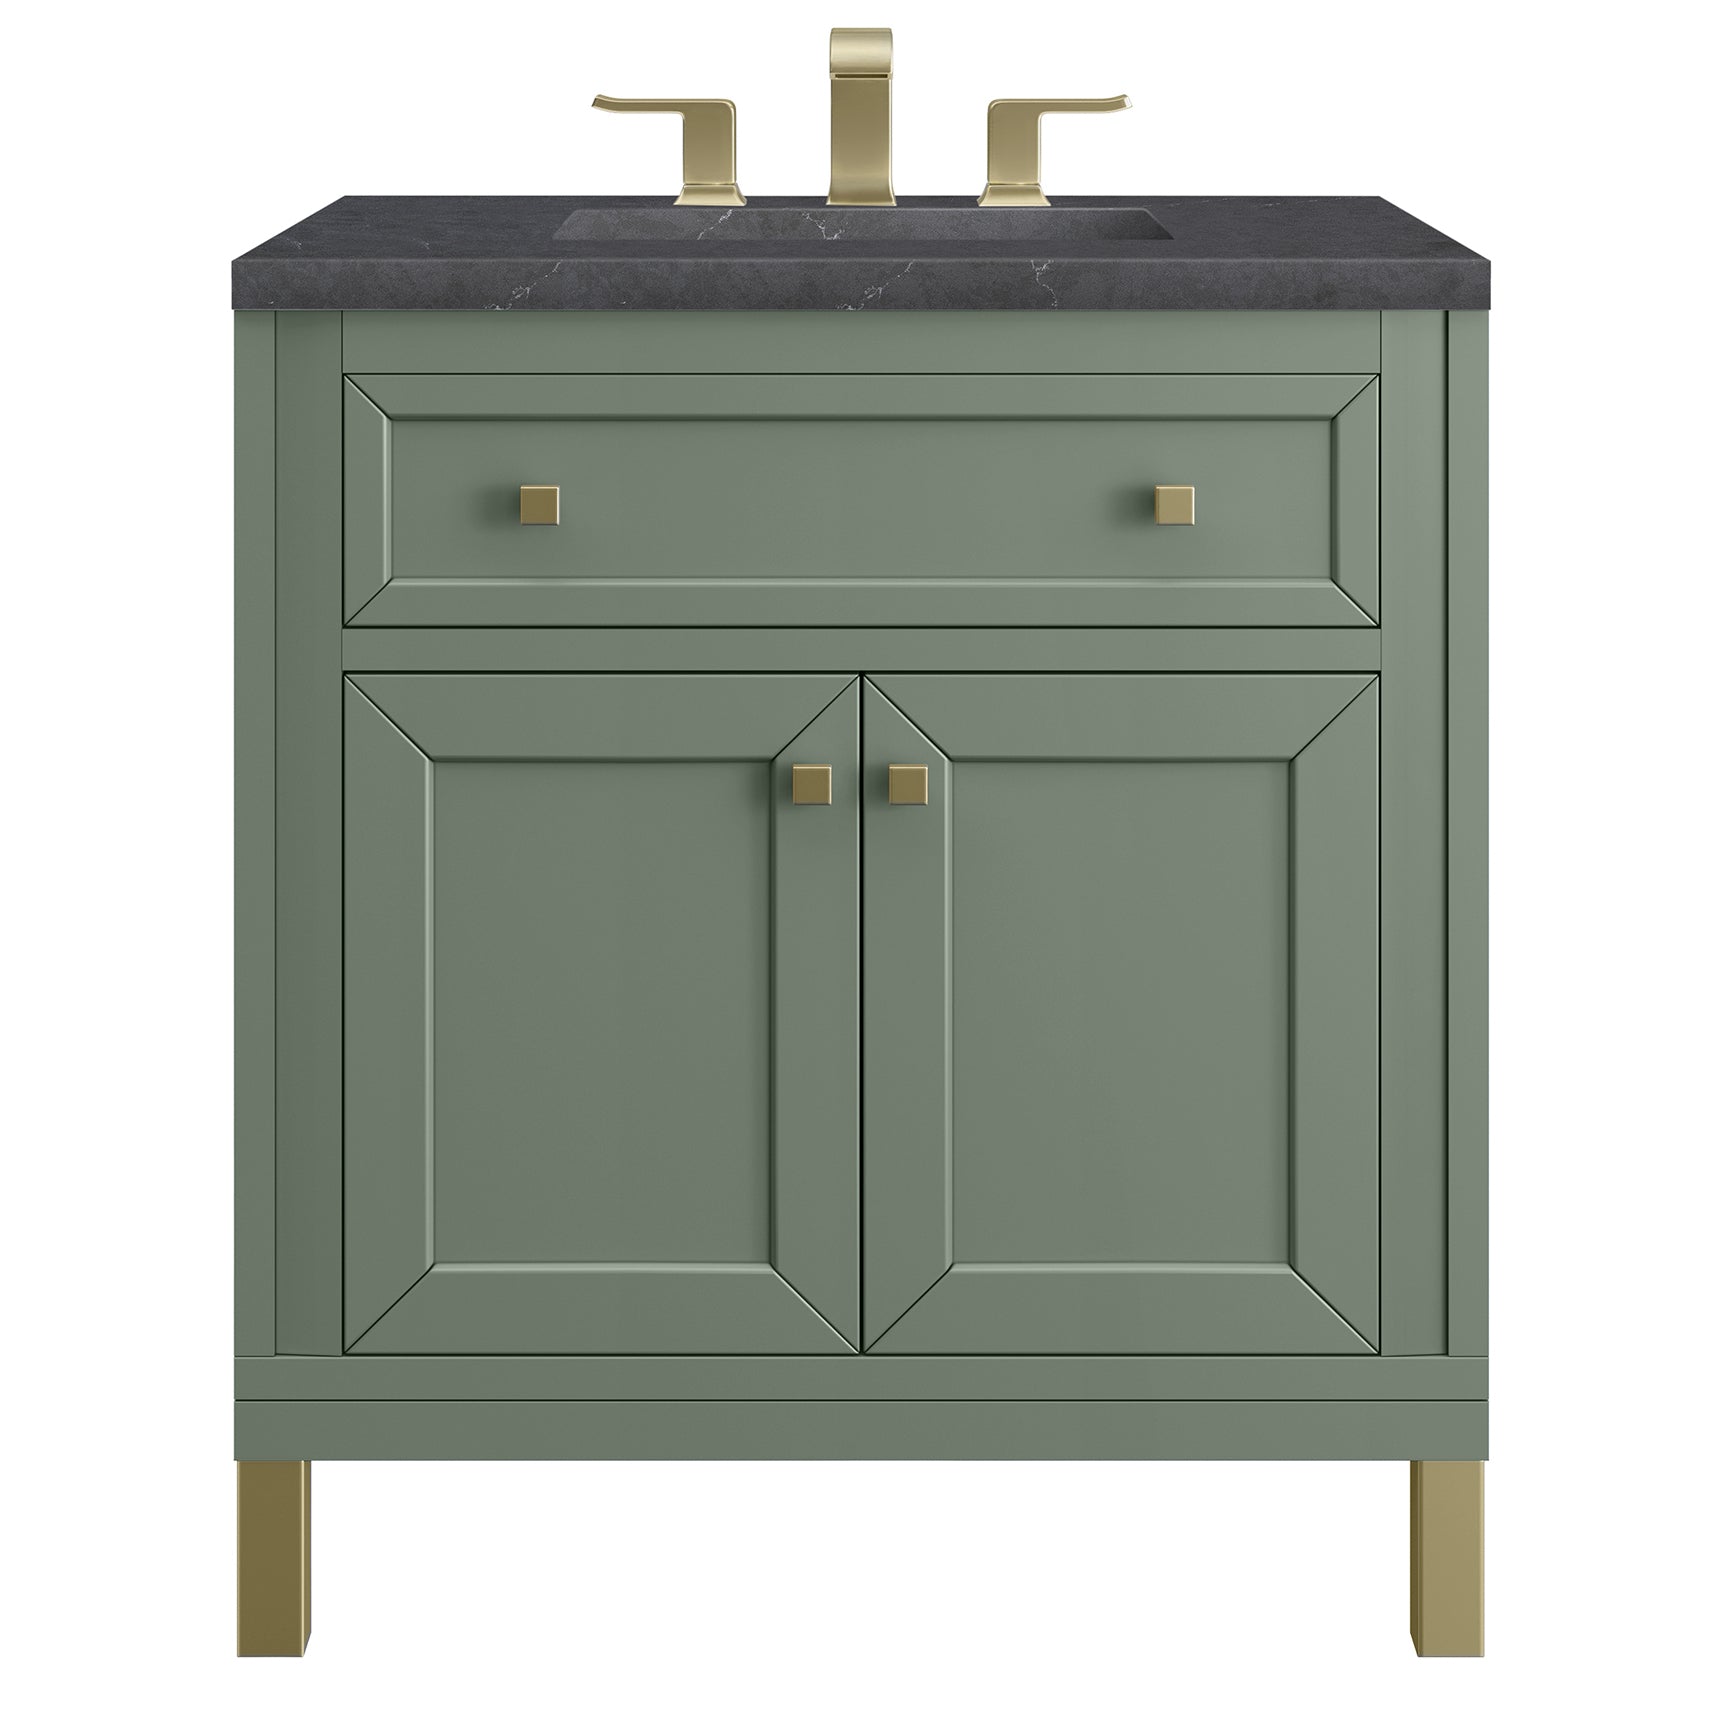 James Martin Vanities Chicago Collection 30 in. Single Vanity in Smokey Celadon with Countertop Options Charcoal Soapstone